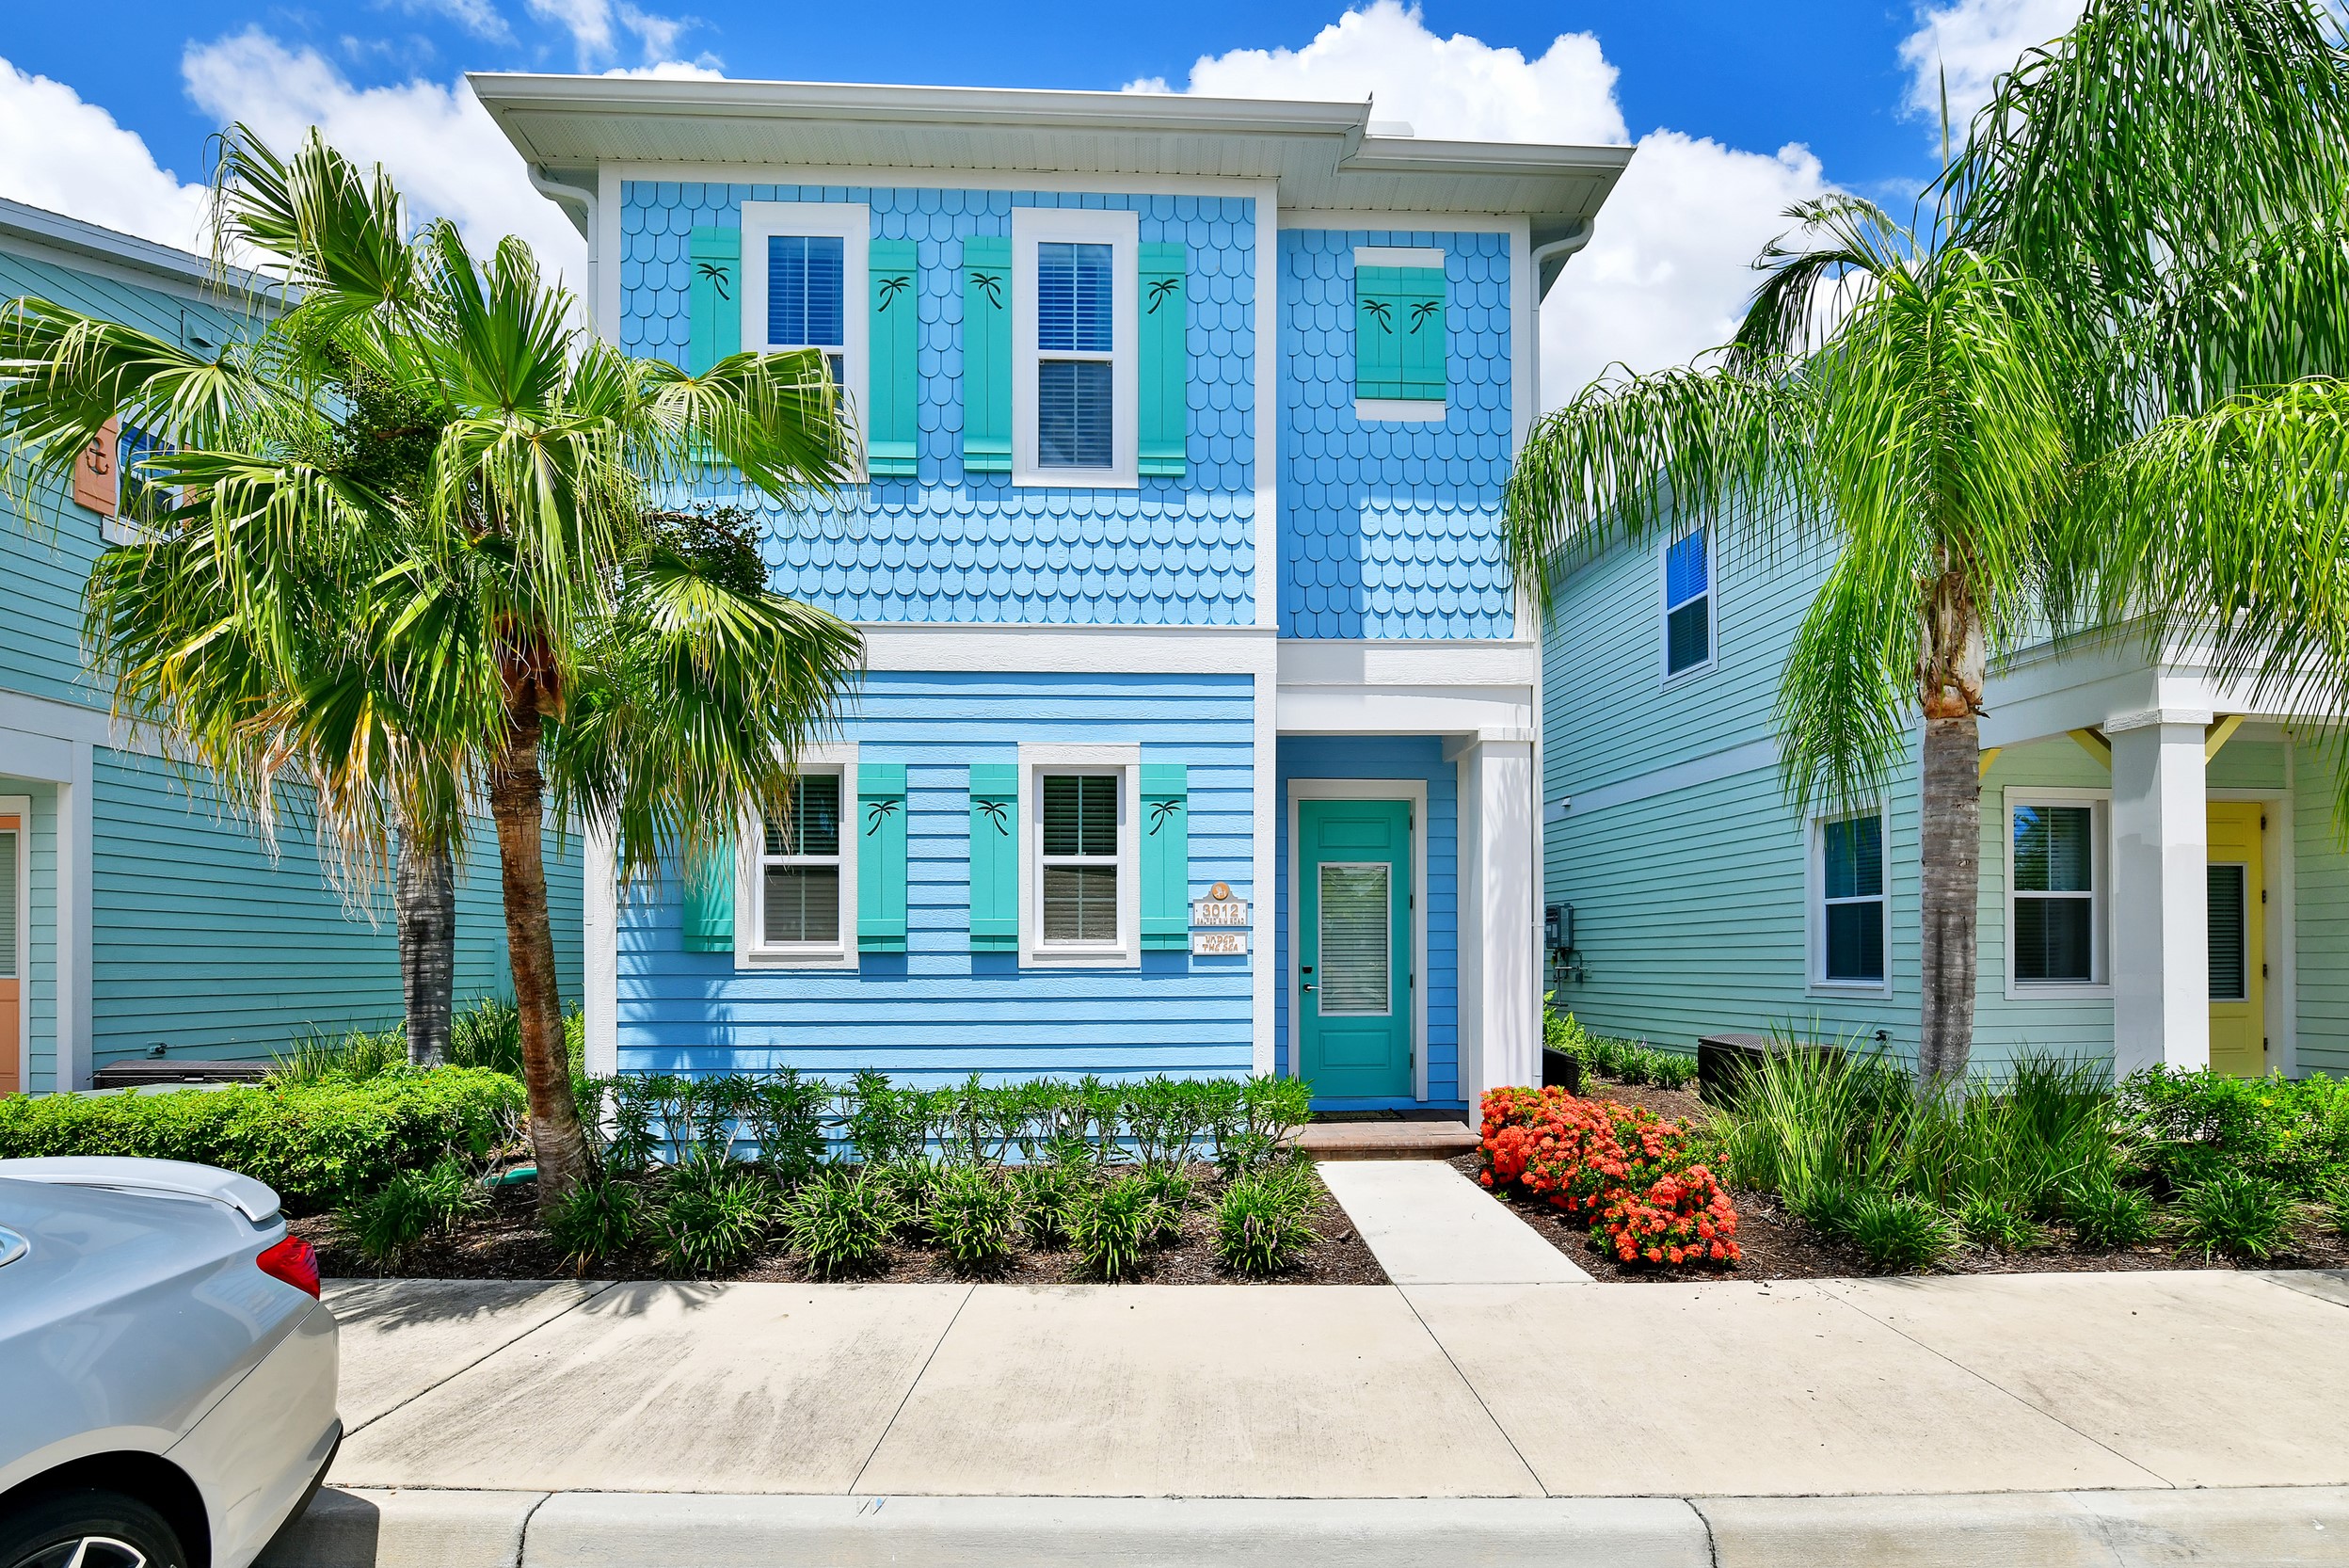 Property Image 1 - Ocean Blue Cottage near Disney with Private Hot Tub & Margaritaville Resort Access - 3012SR